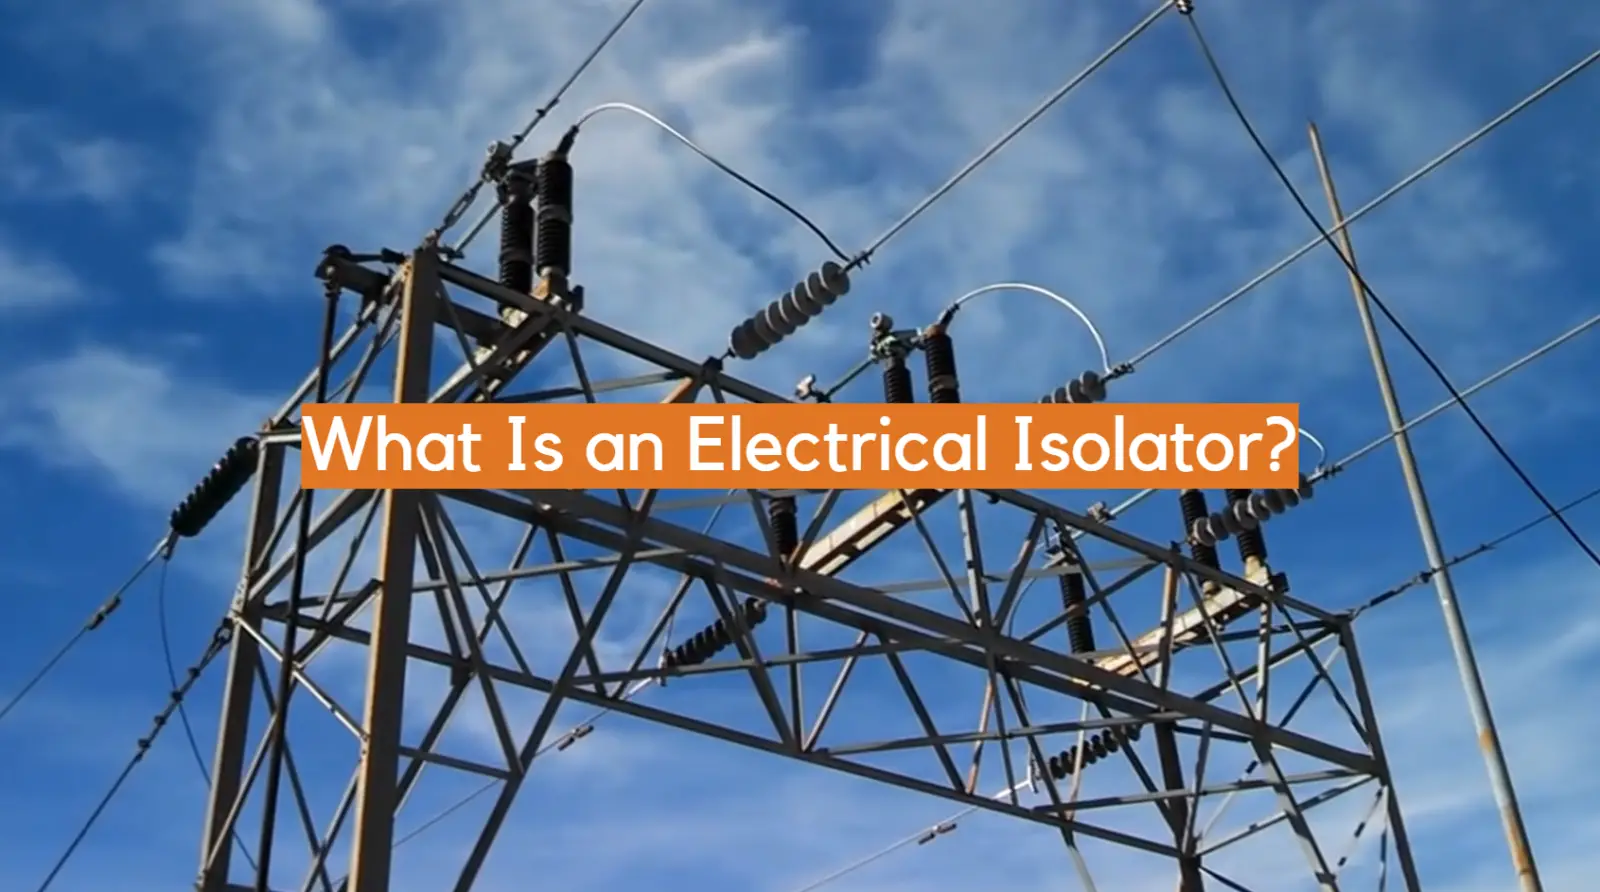 What Is an Electrical Isolator?